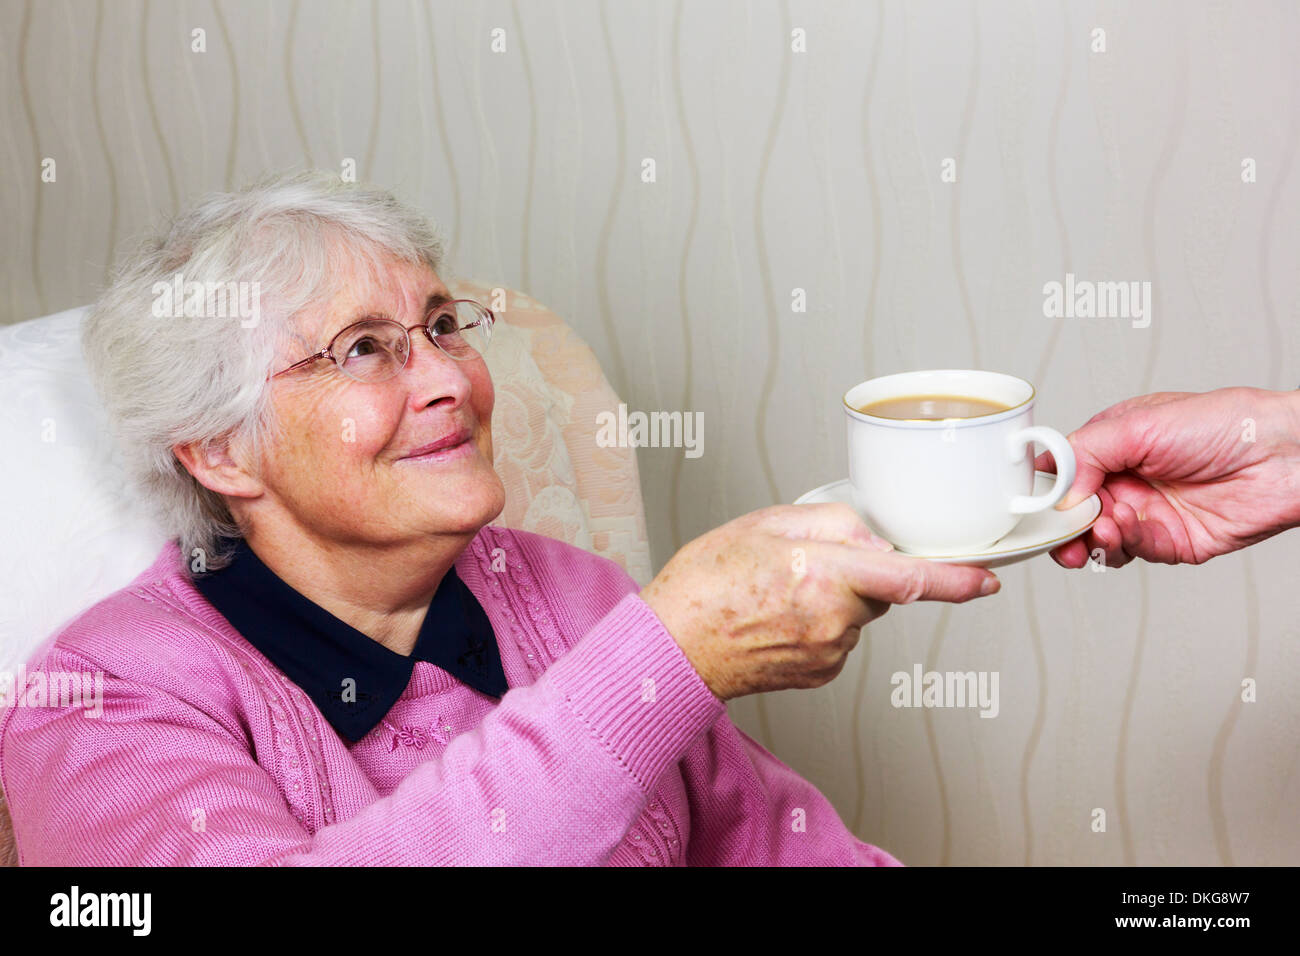 Frail sweet happy old elderly senior woman looking and smiling at a caregiver handing her a cup of tea during daily help home visit. England UK Stock Photo